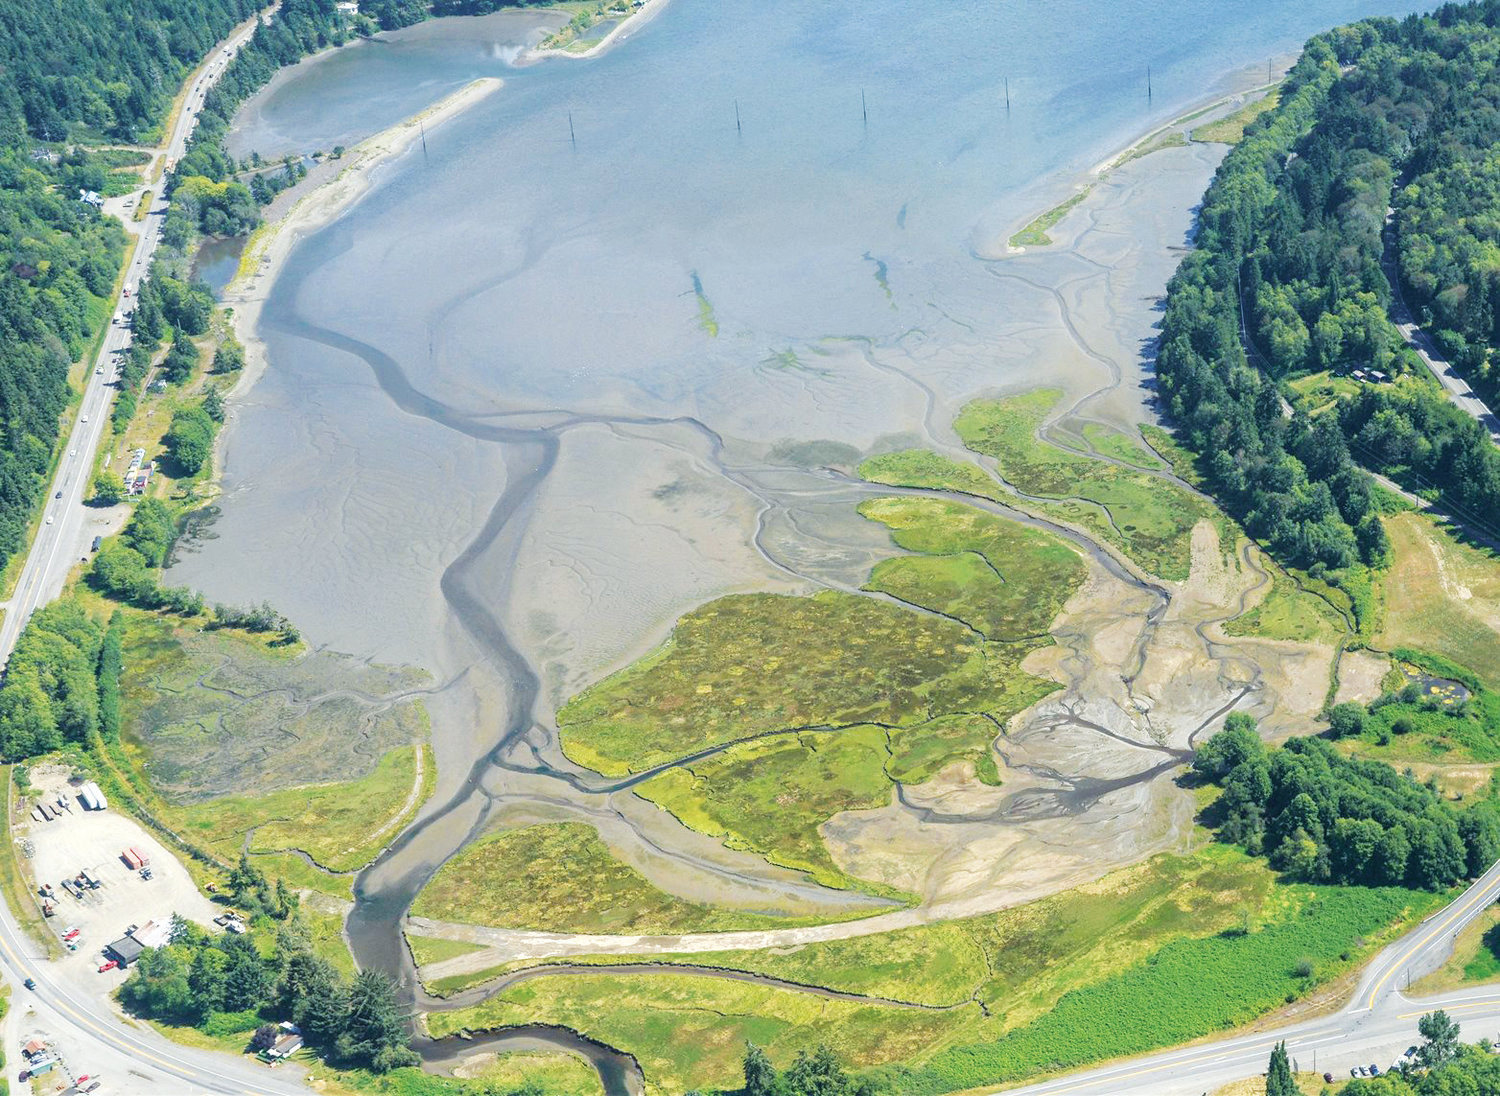 Discovery Bay, an estuarine salt marsh habitat, freshwater marsh, sand spit, tide flats, tidal channels and the mouth of a fish-bearing stream, provides critical habitat for federally listed salmon species and other fish and wildlife, such as Olympia oysters, forage fish and migratory shorebirds.